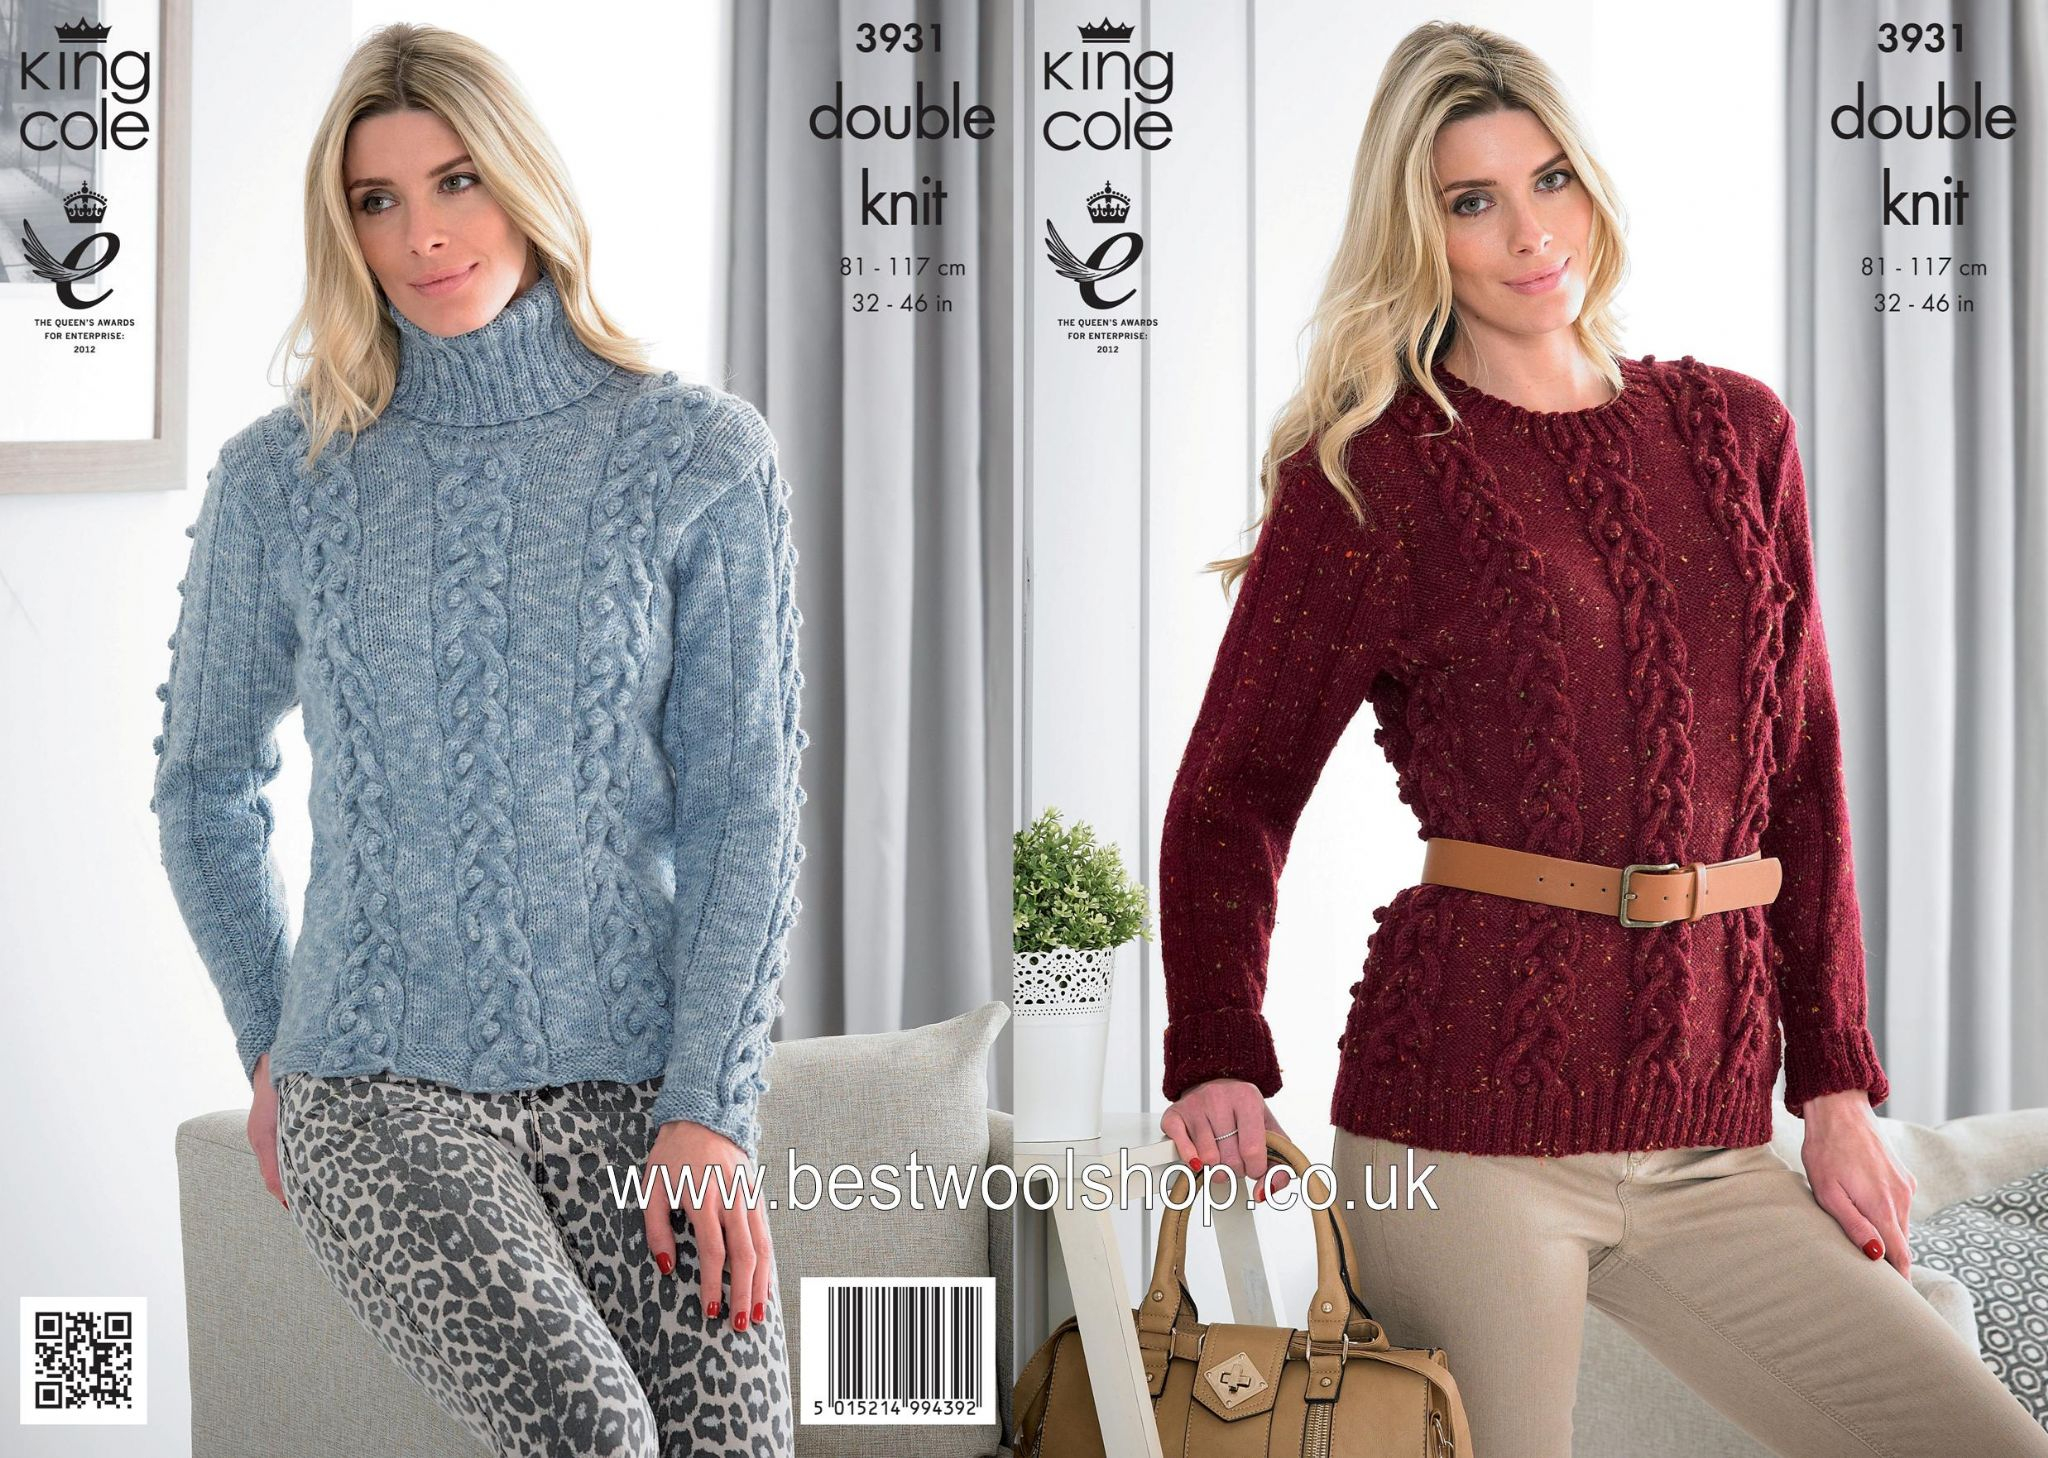 Dk Knitting Patterns 3931 King Cole Moods Dk Round Polo Neck Cabled Sweater Knitting Pattern To Fit Chest 32 To 46 4